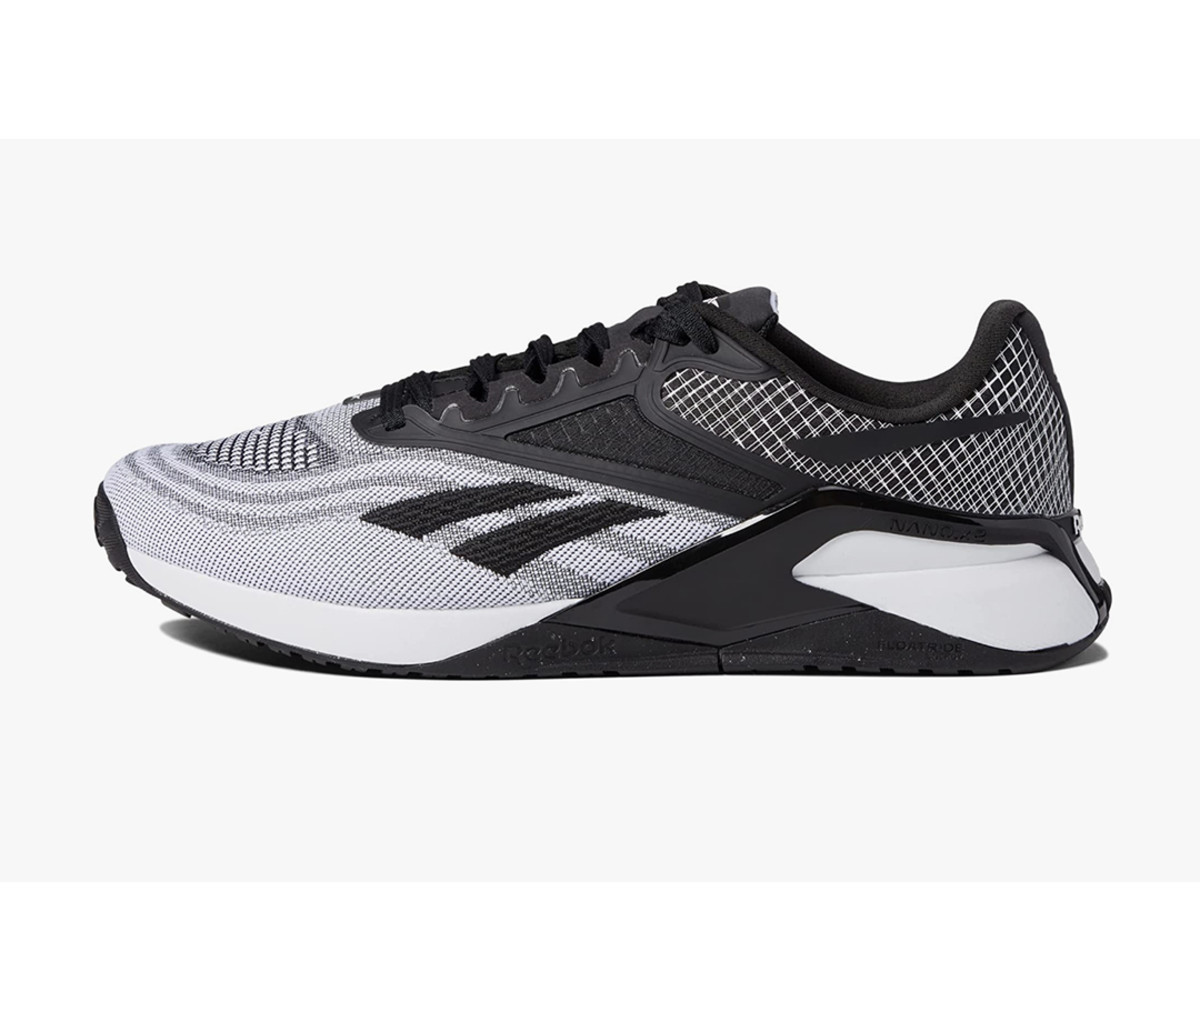 Hit the Gym With These Reebok Nano X2 Training Shoes - Men's Journal